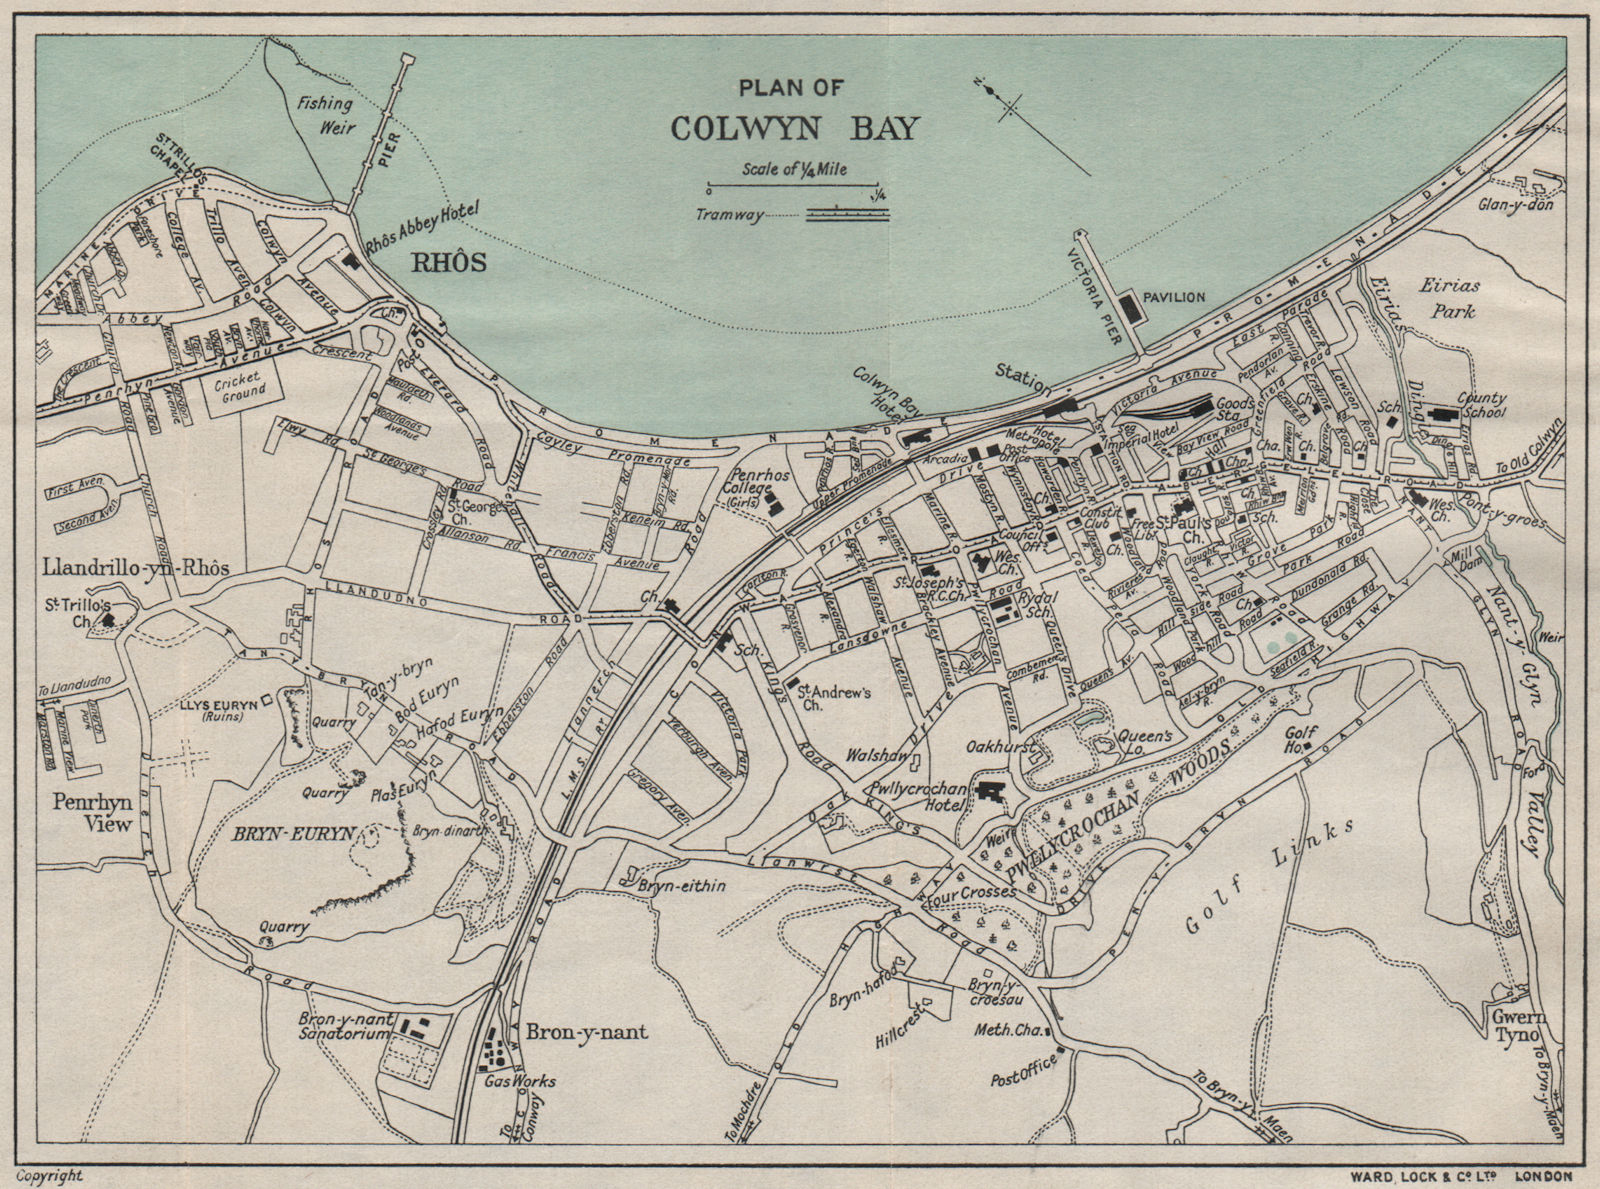 Associate Product COLWYN BAY vintage town/city plan. Wales. WARD LOCK 1930 old vintage map chart